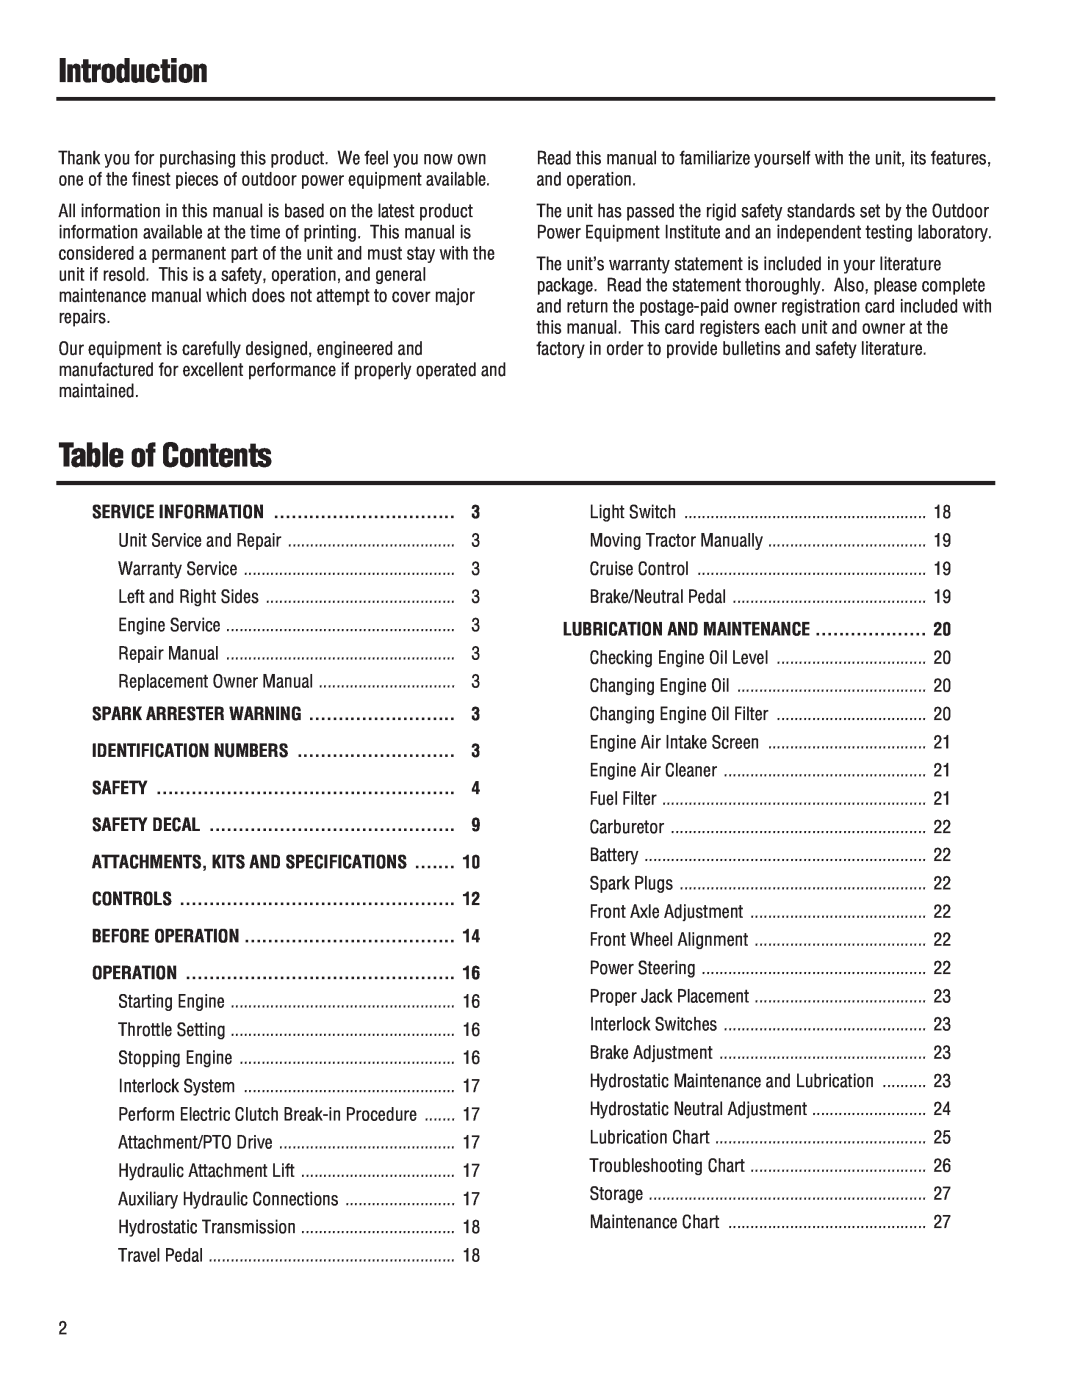 Troy-Bilt 13074-GTX 18, 13101-GTX 16, 13101 - GTX 16 Introduction, Table of Contents, Safety Decal, Controls, Operation 